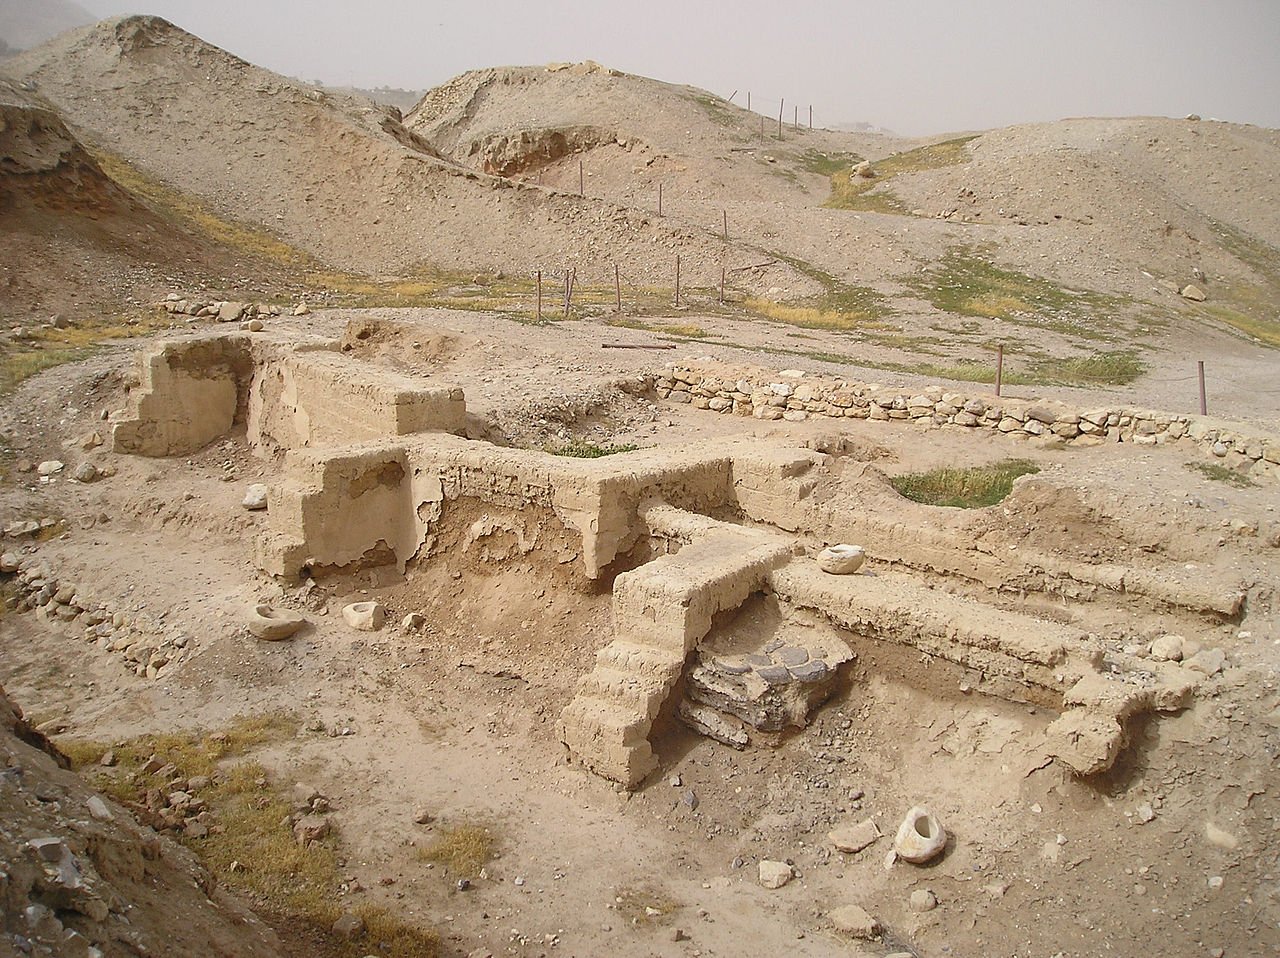 A photograph of ancient ruins of a house in a desert-like setting.